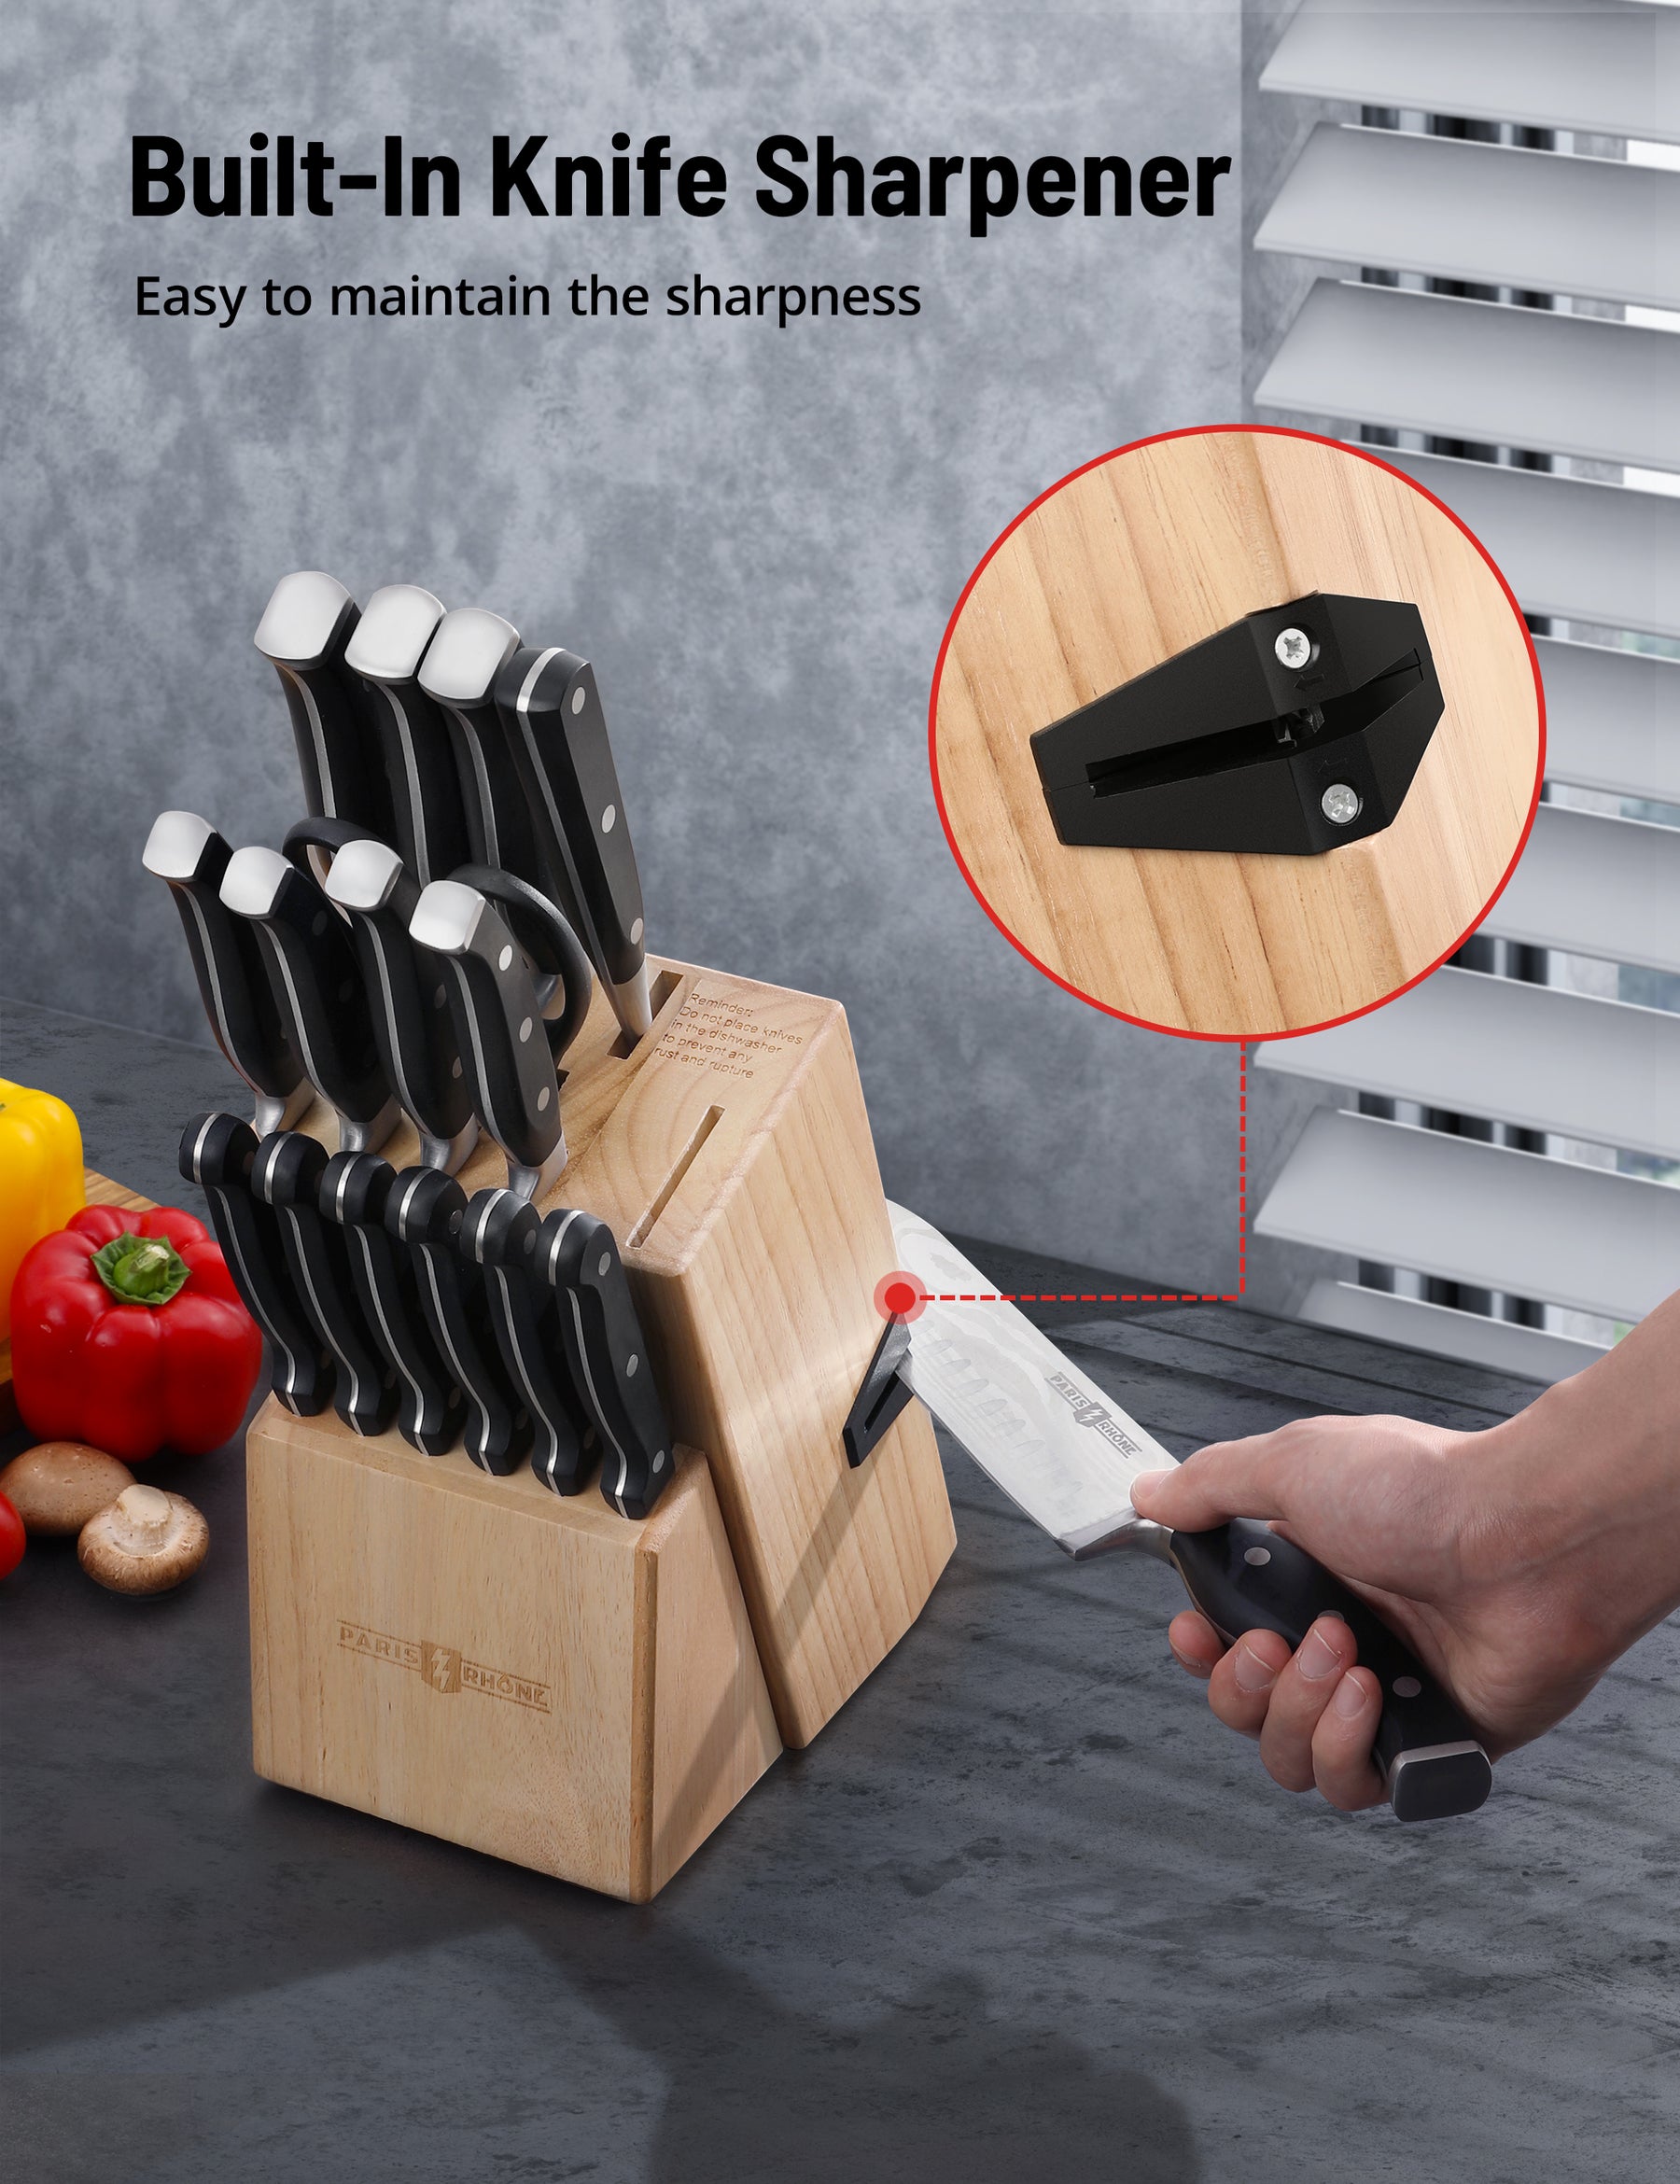 Built-In Knife Sharpener Easy to maintain the sharpness